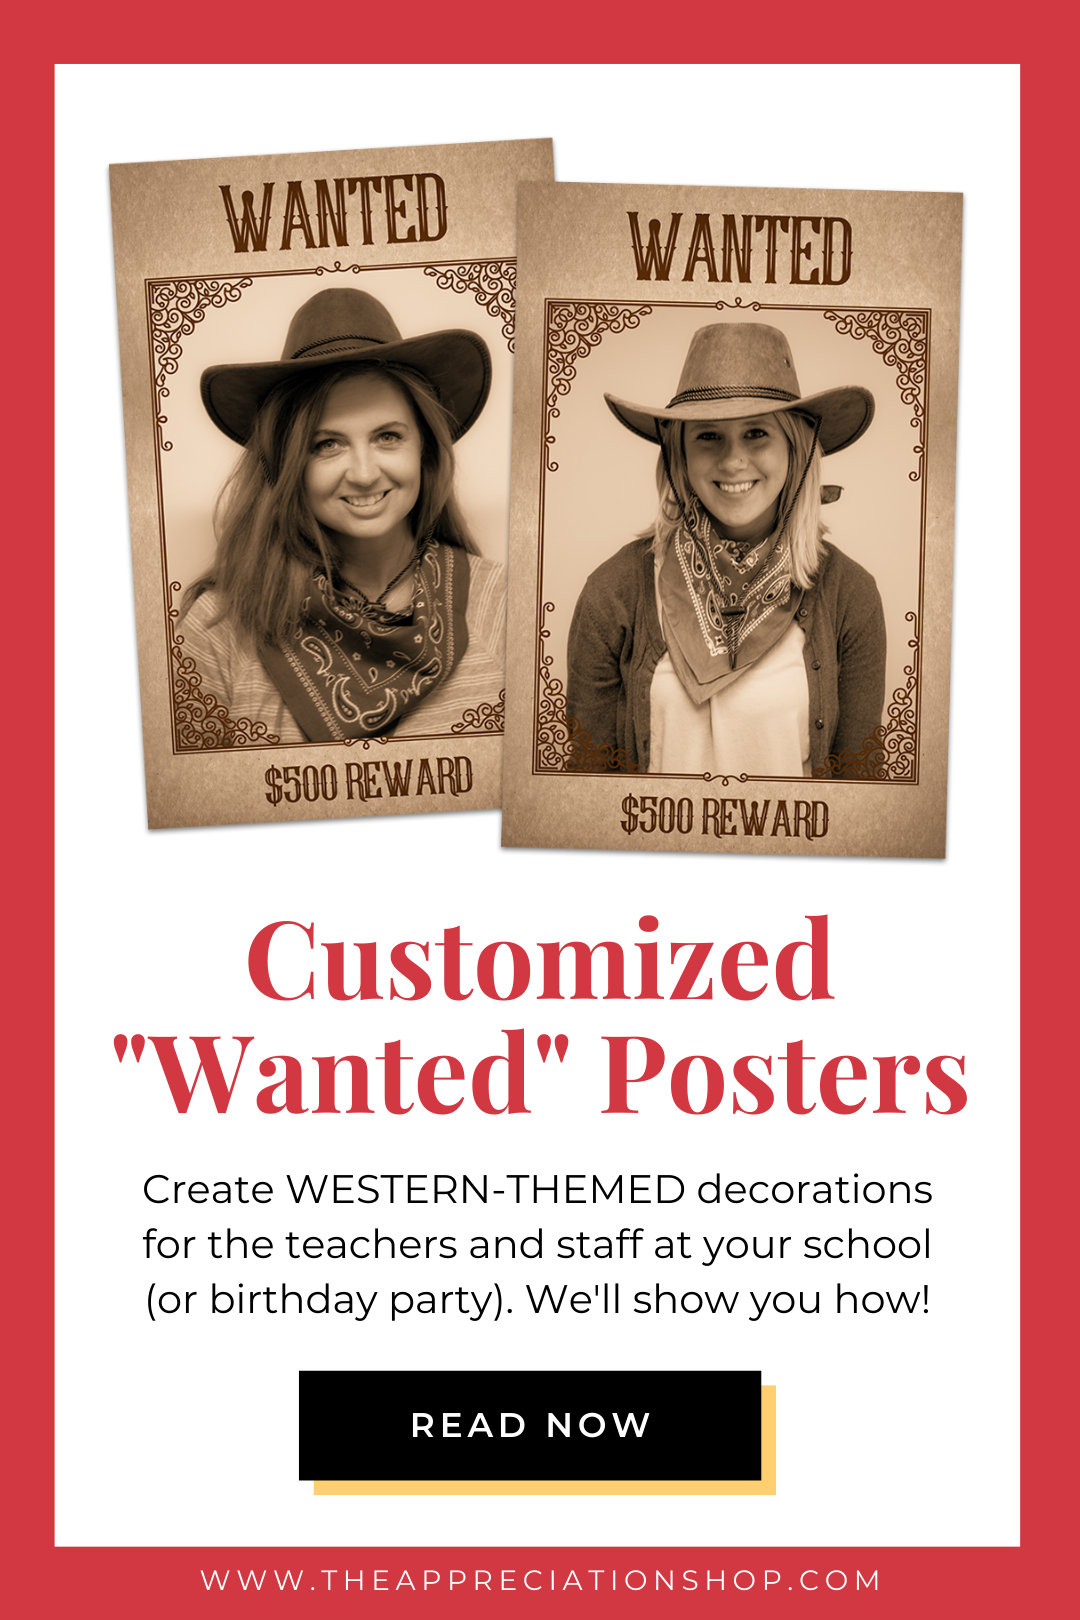 How to make a western themed "Wanted Poster" video tutorial